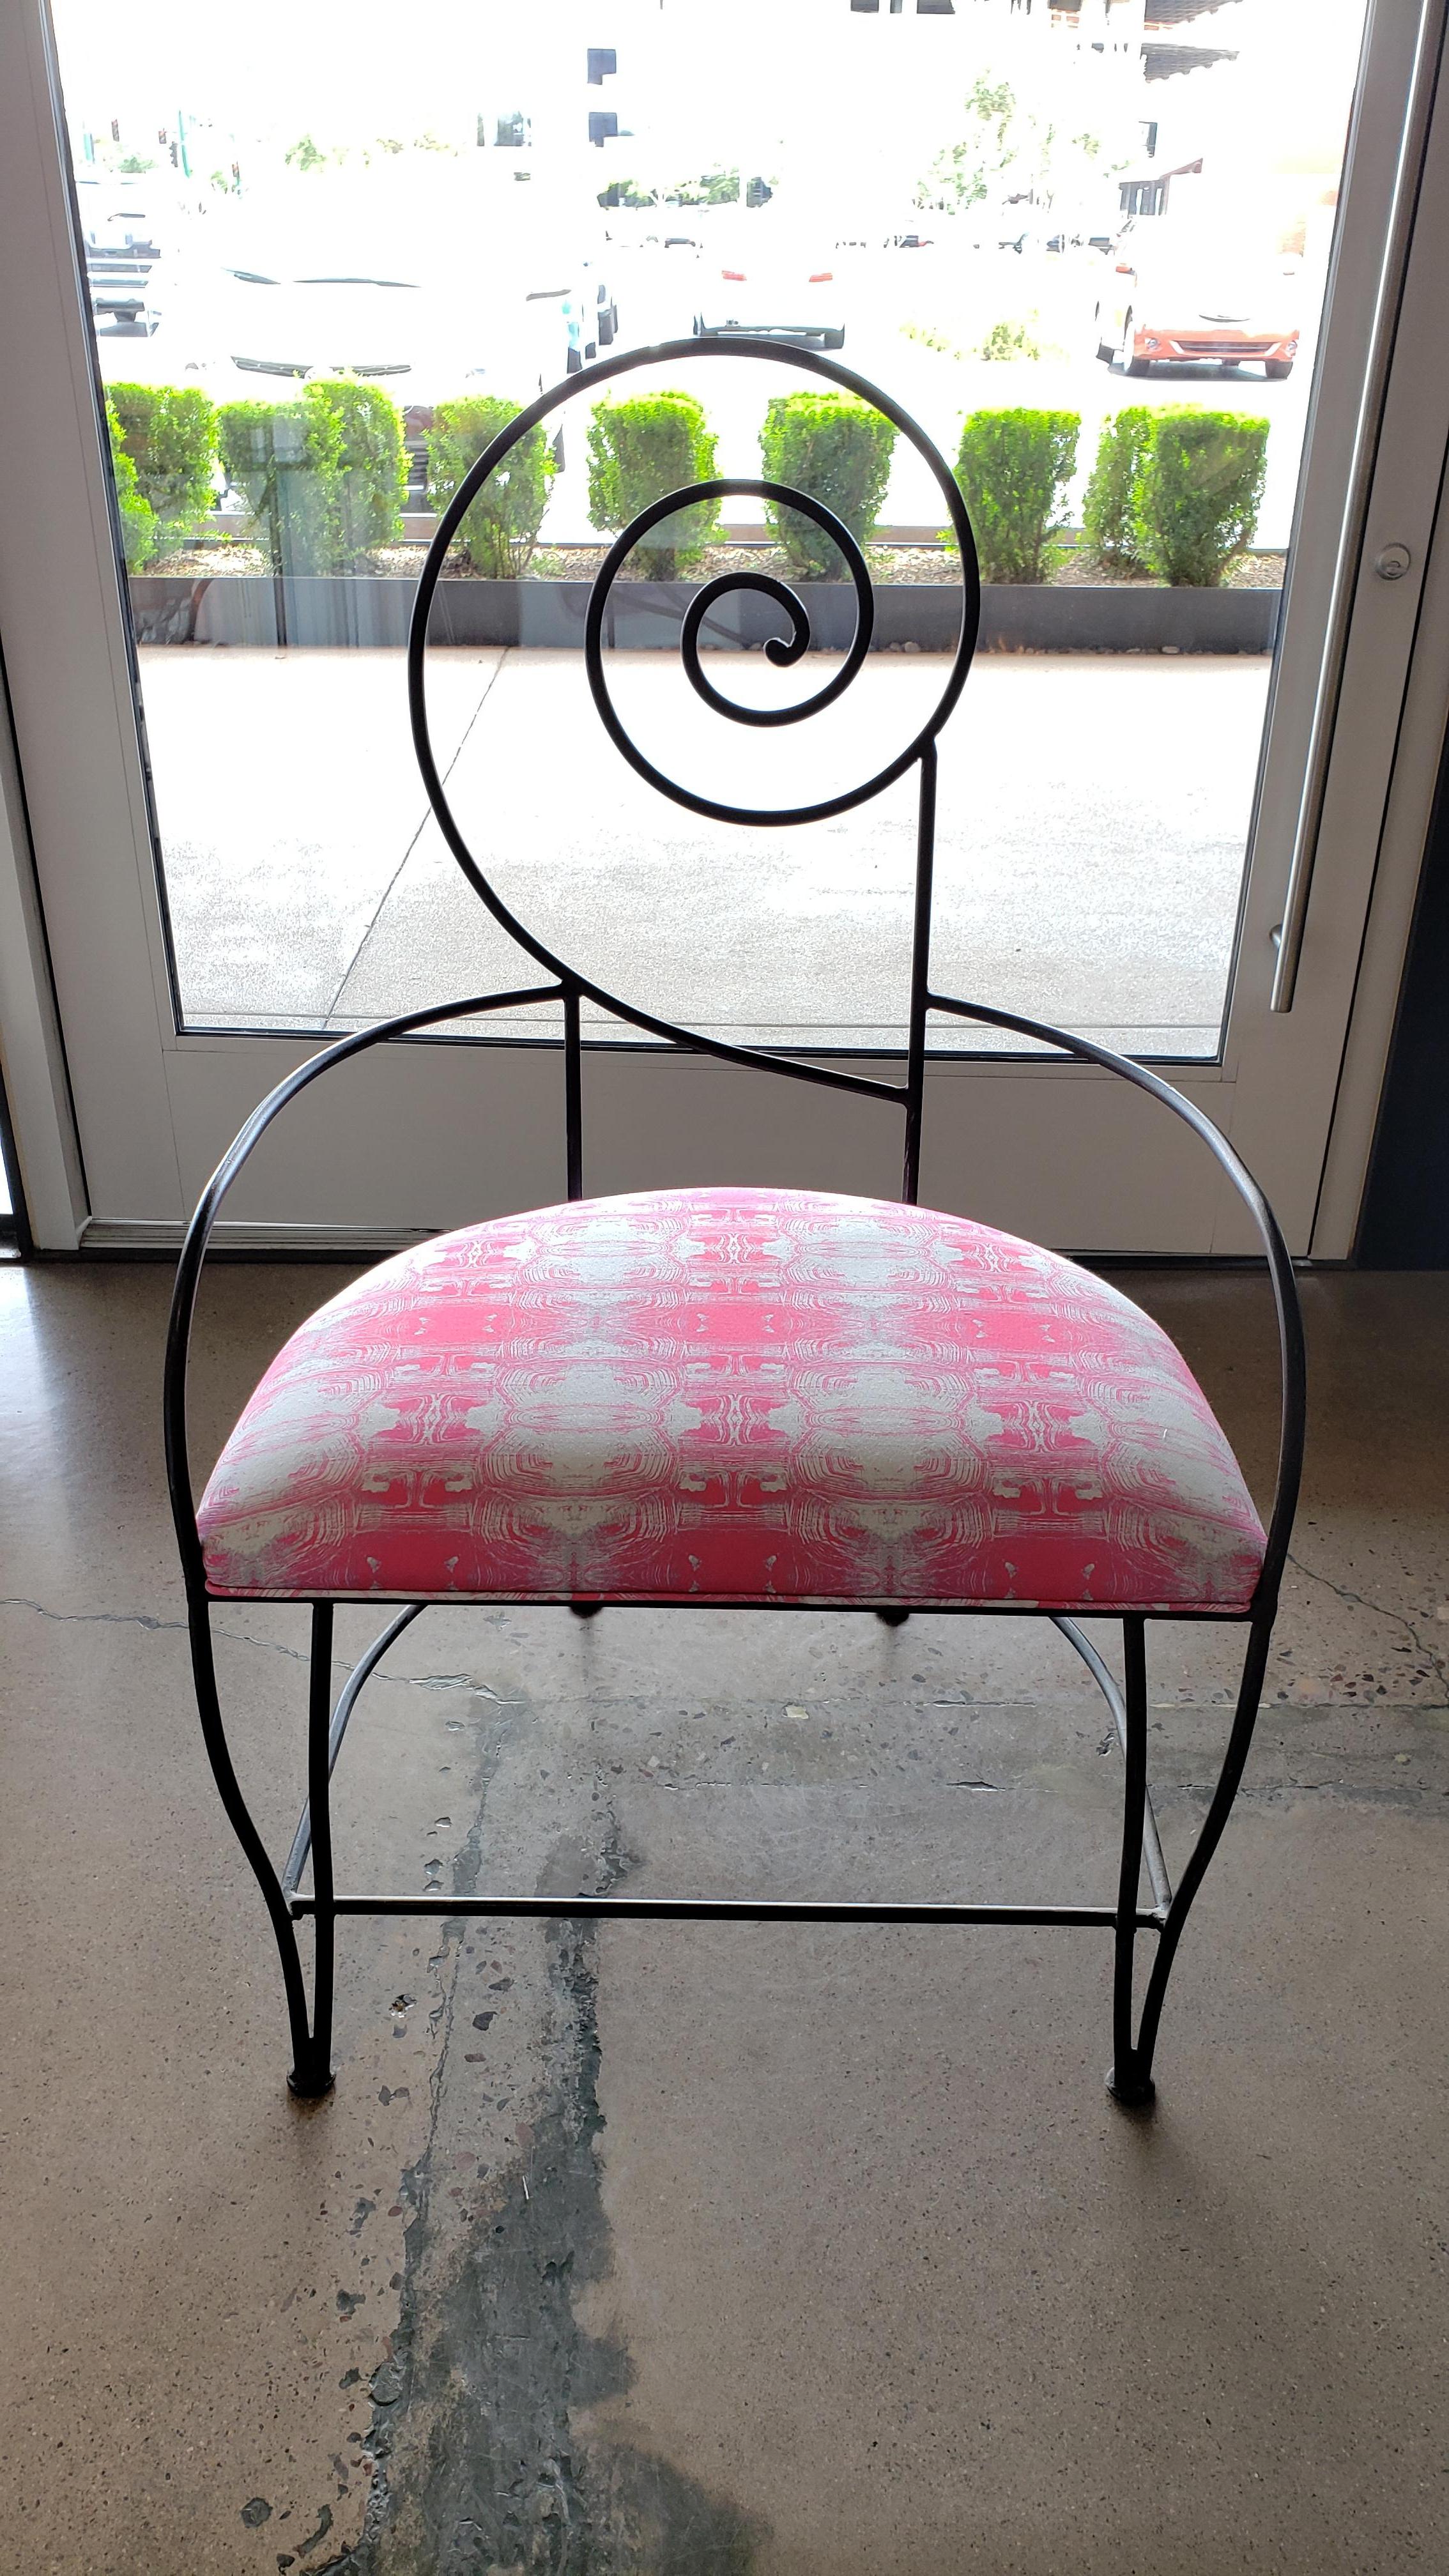 Newly reupholstered in pink tortoise root cellar indoor/outdoor fabric, these midcentury beauties have a wide and very comfortable seat base. Perfect for entertaining inside or outside- al fresco.
Back of the seat measurement is 25